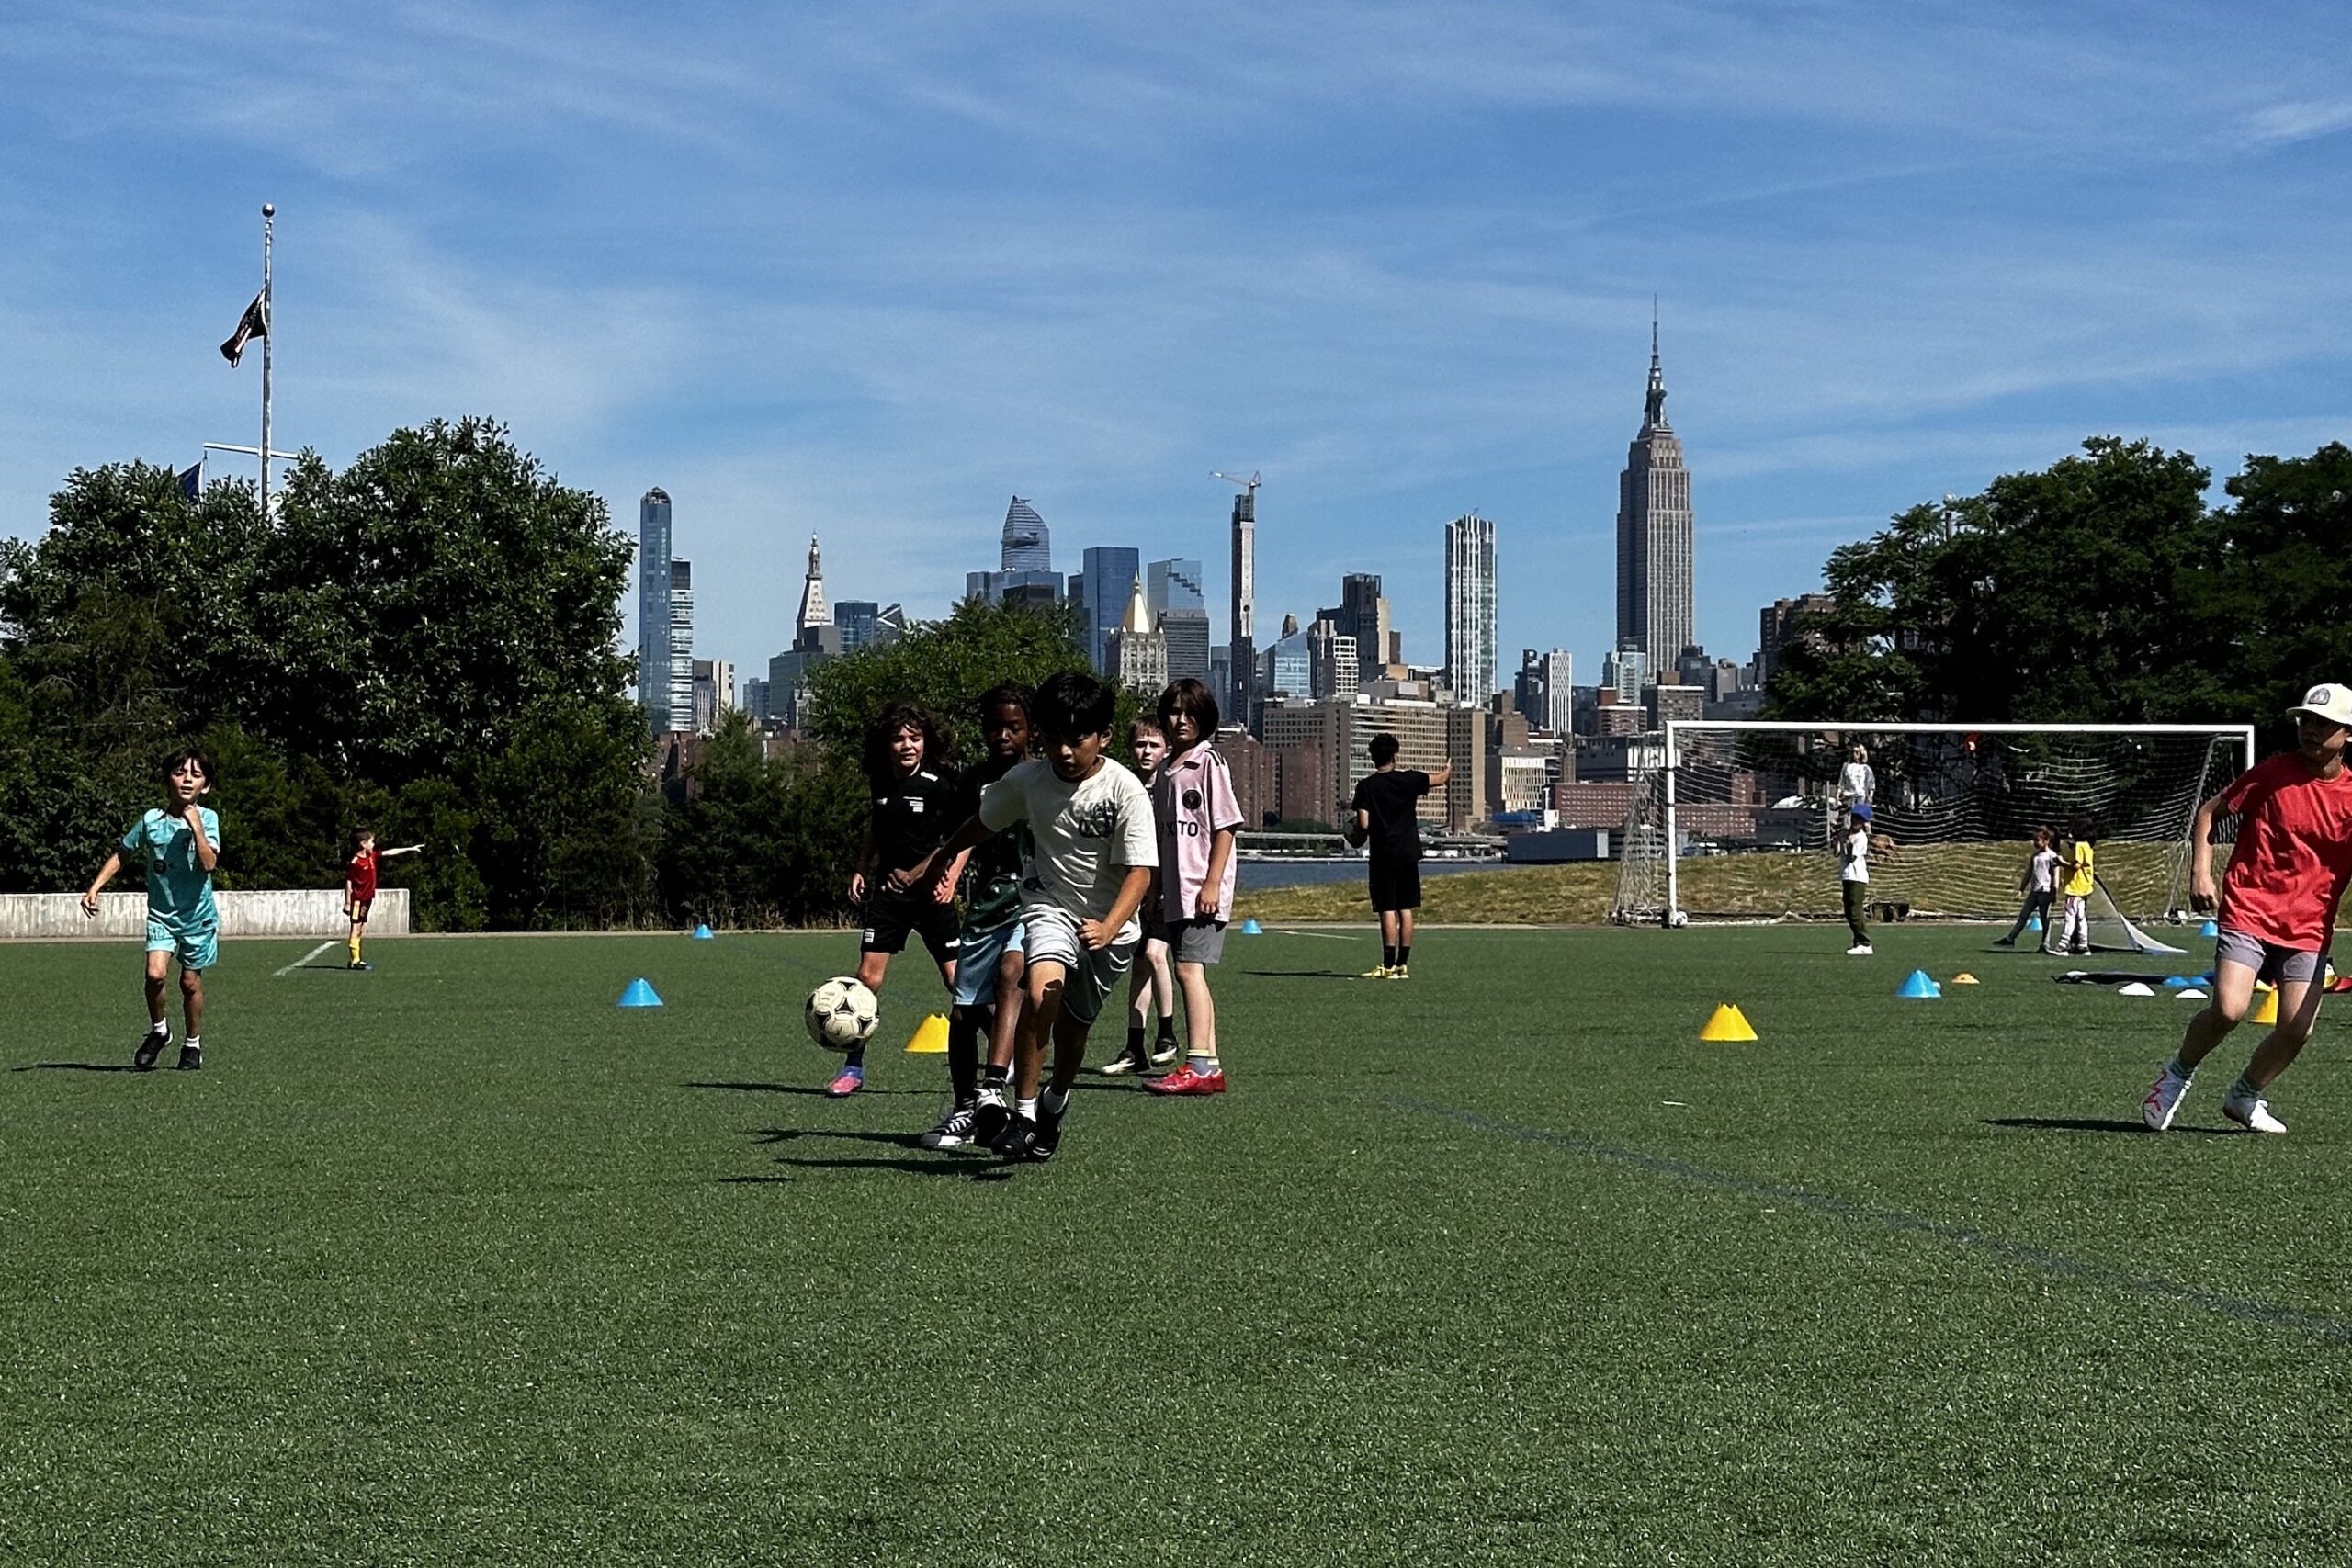 Williamsburg Soccer Club hosts World Soccer Day event at Bushwick Inlet Park with games, merchandise and free treats